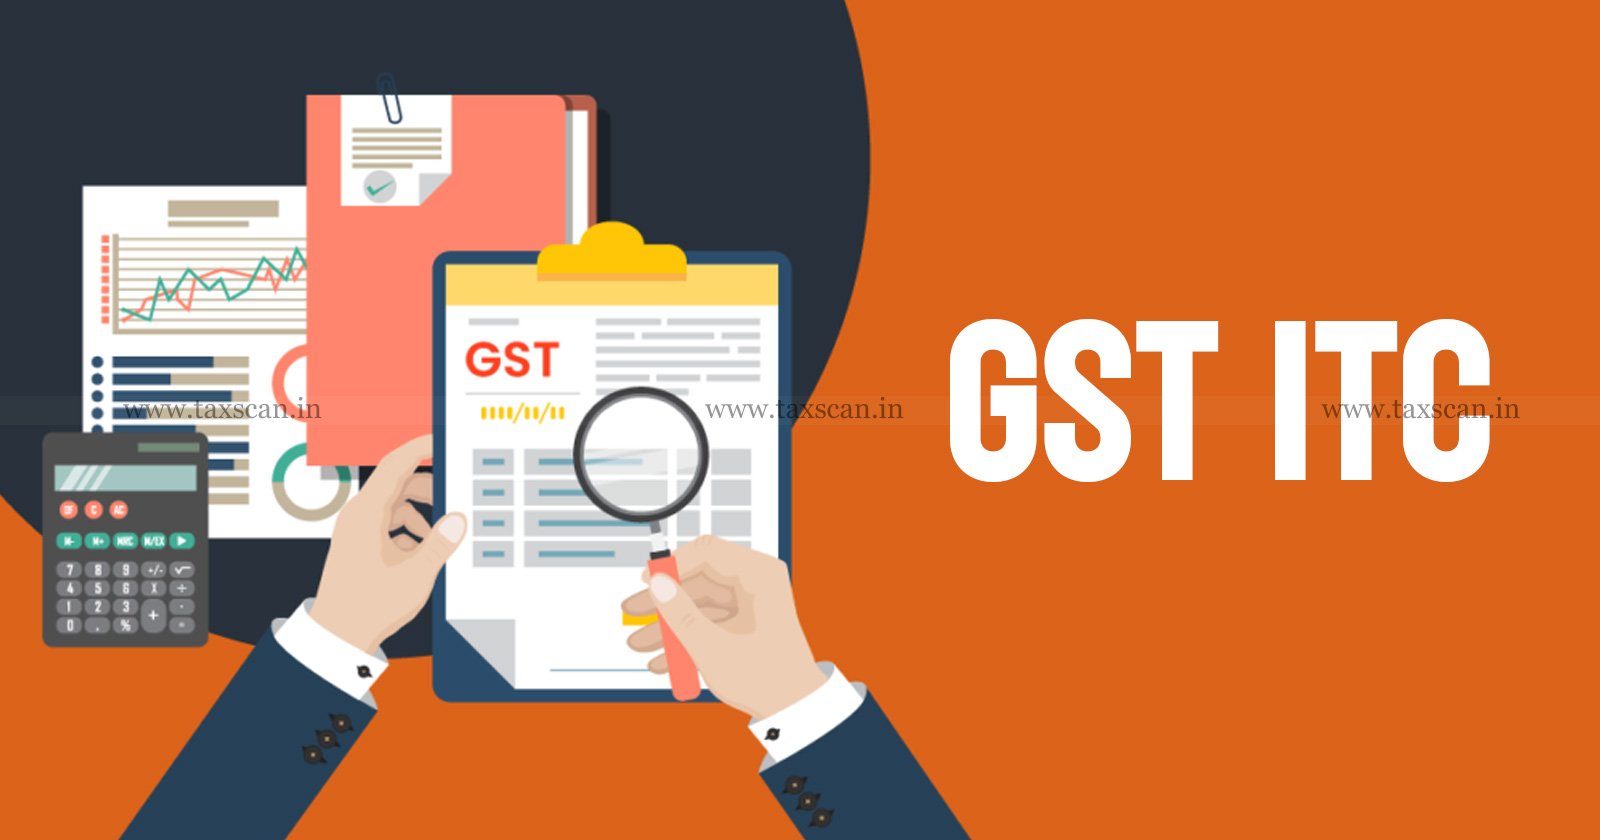 Restriction of GST ITC - GST ITC - immovable property - ITC - notice - Supreme Court - GST - Taxscan